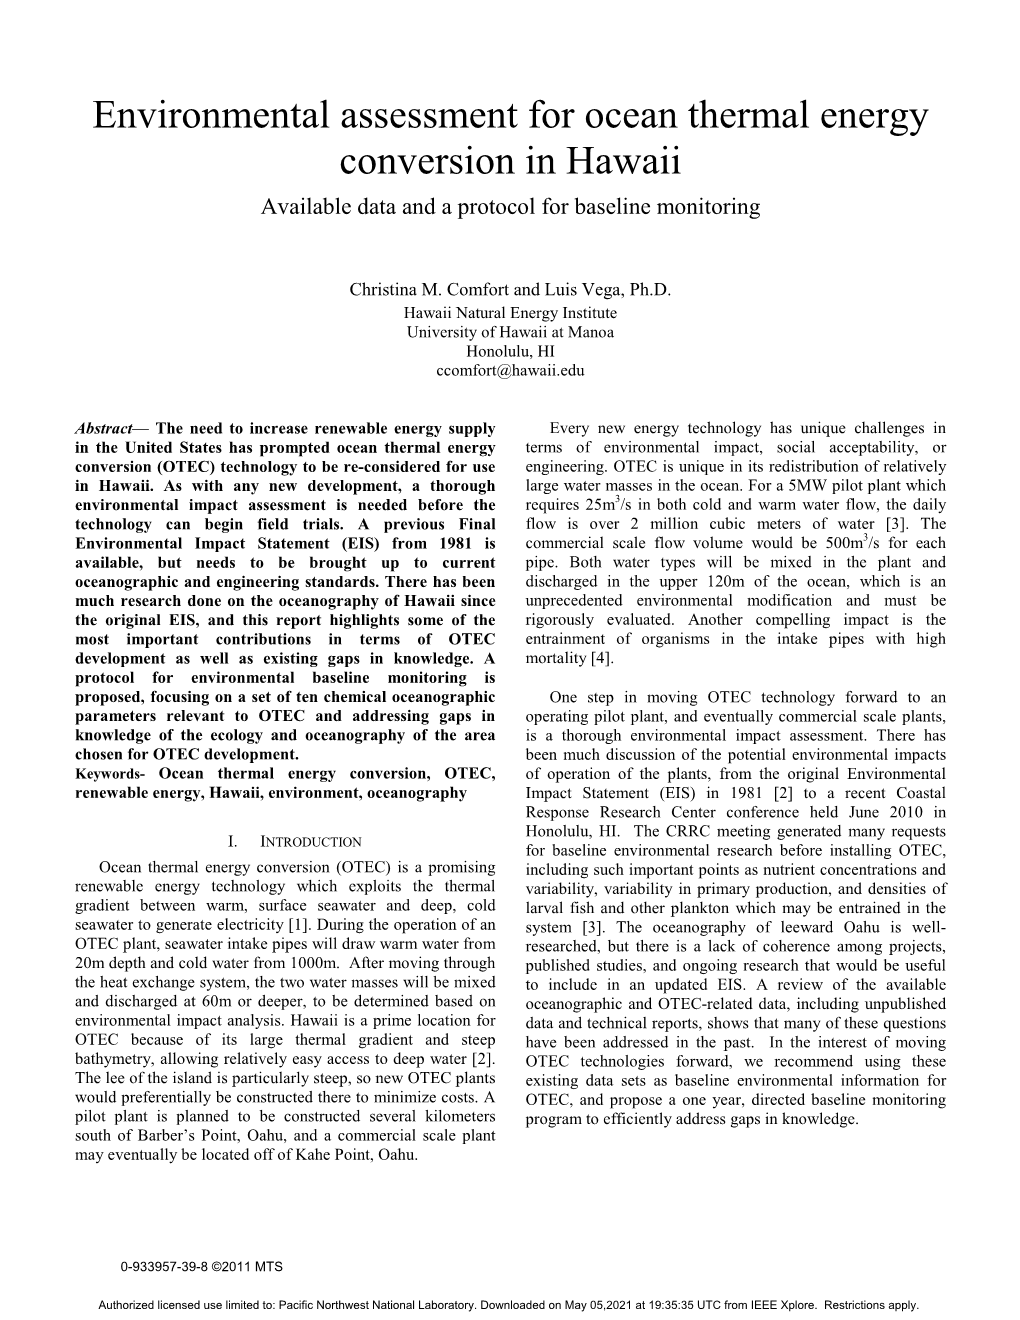 Environmental Assessment for Ocean Thermal Energy Conversion in Hawaii Available Data and a Protocol for Baseline Monitoring